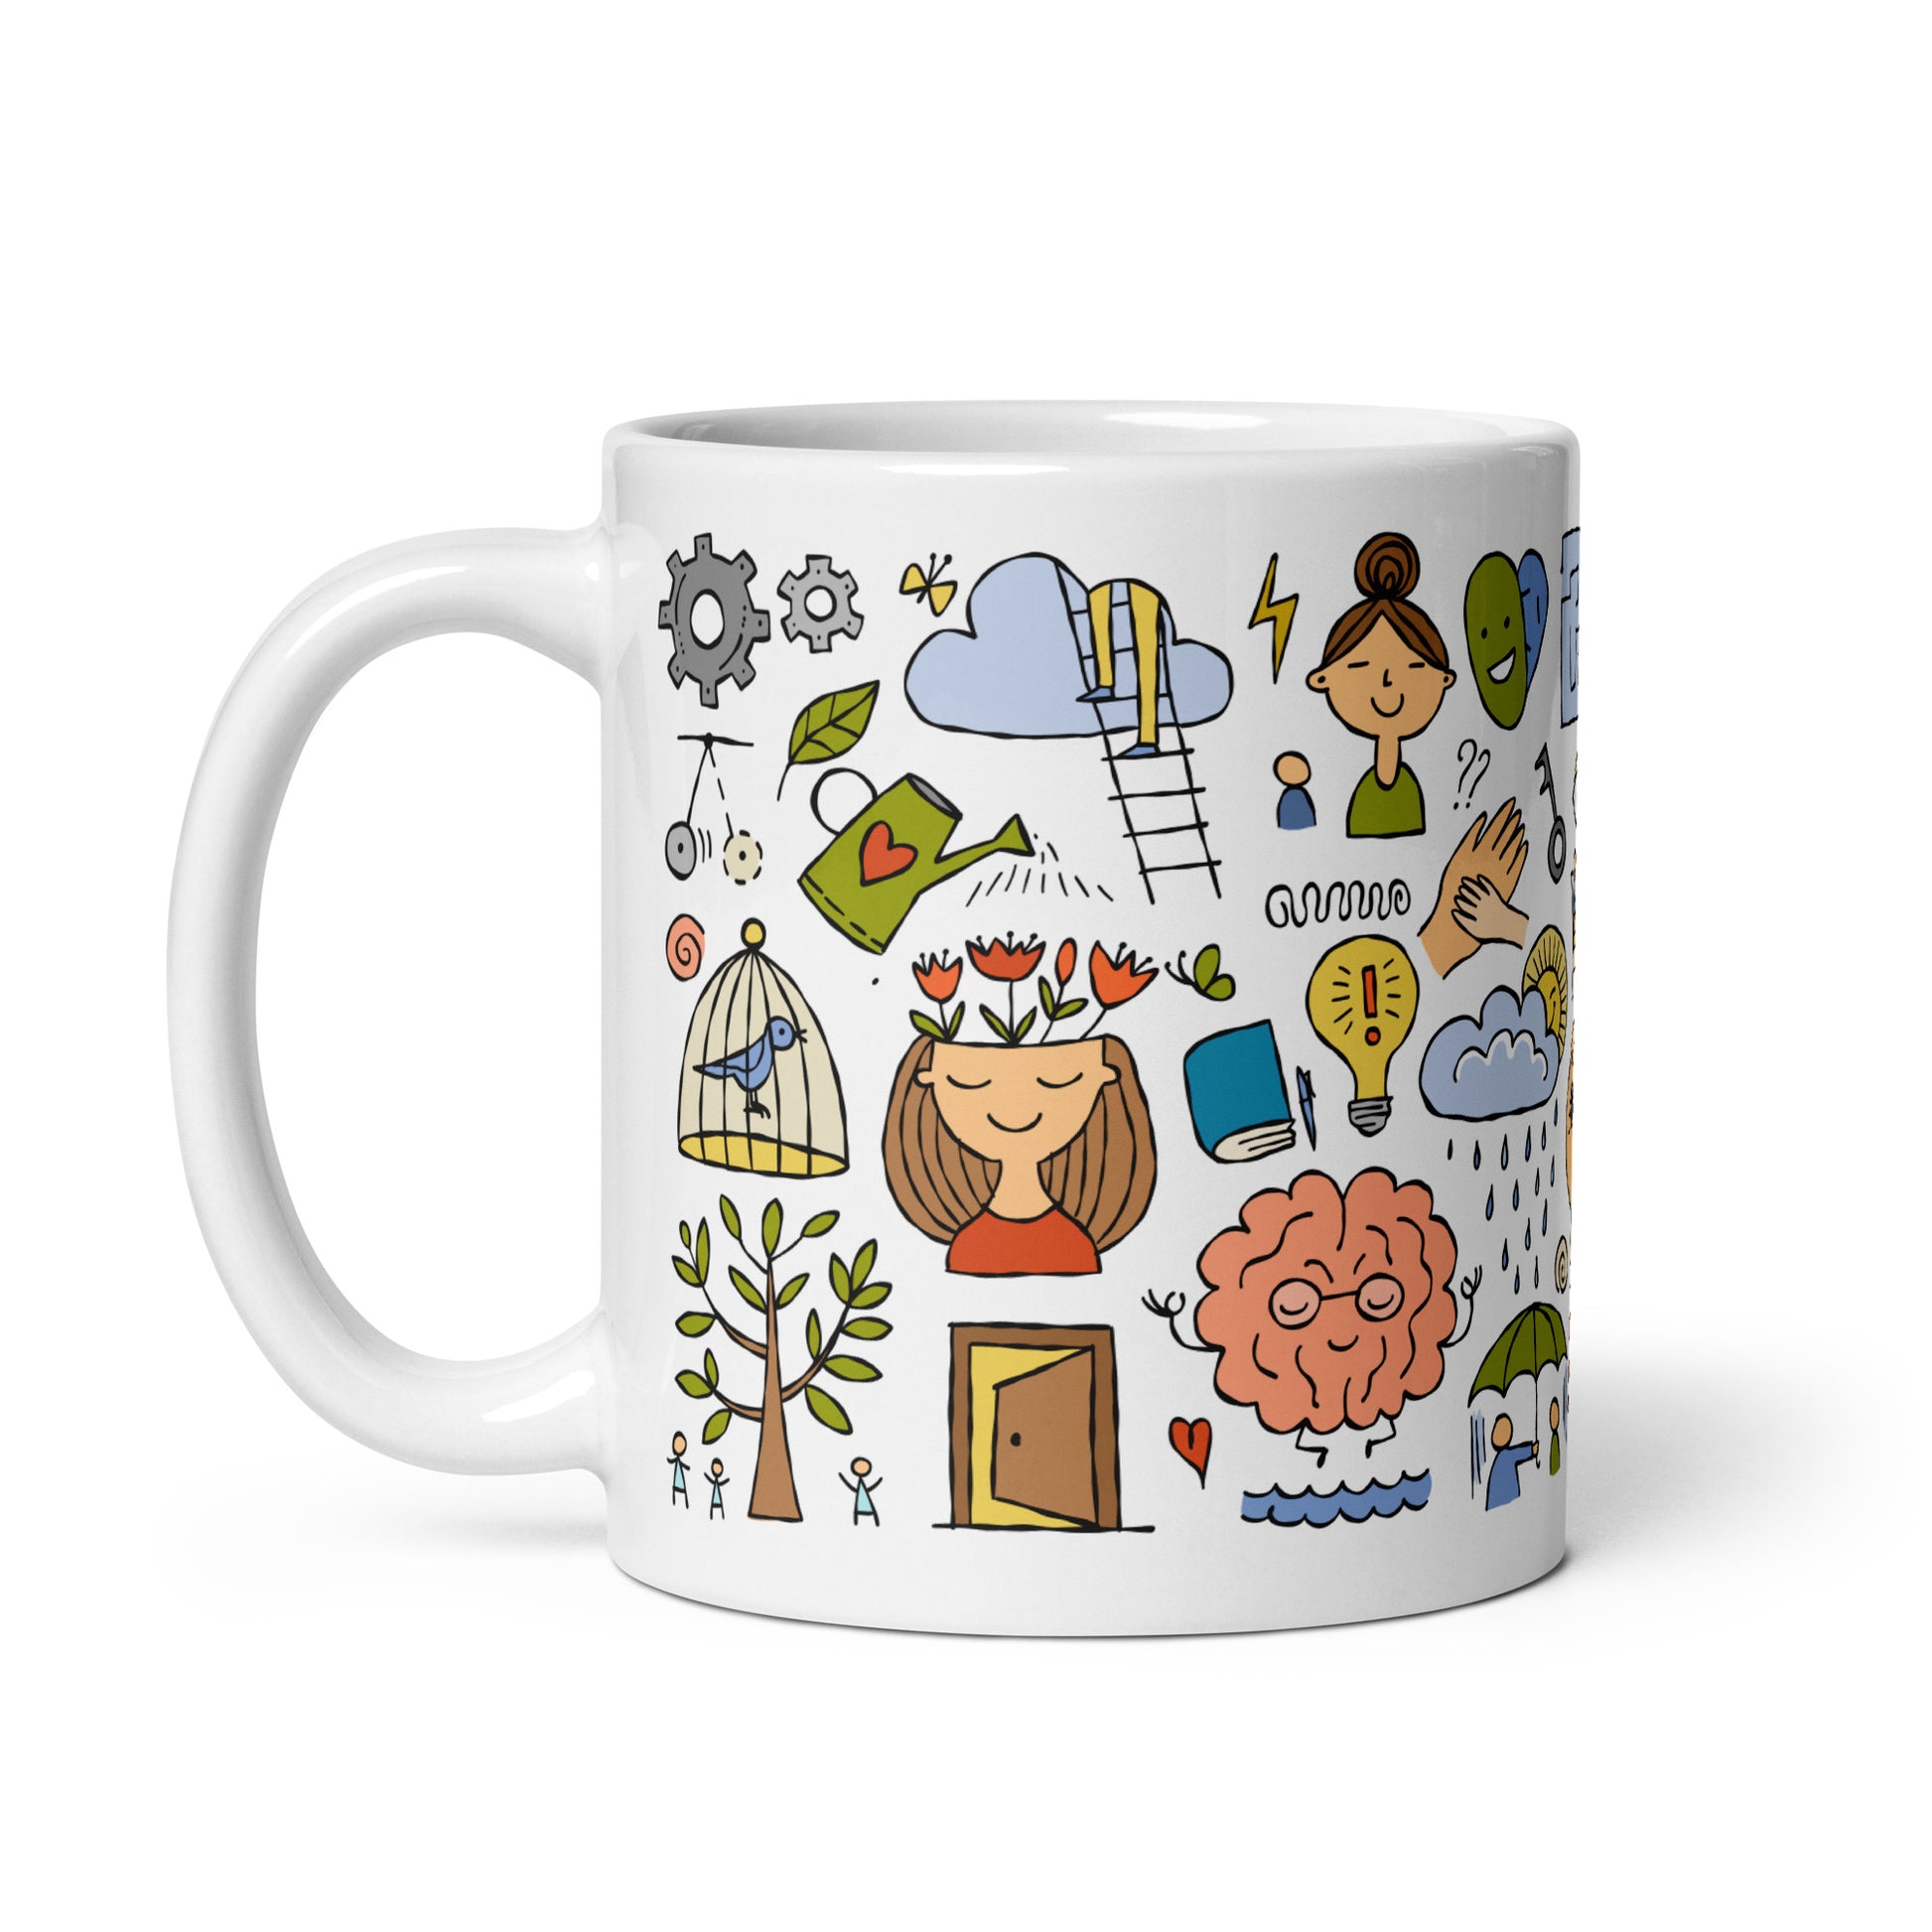 Personalized funny Psychology concept art mug 11oz with the quote "Change your thoughts and you change your world" by Norman Vincent Peale.